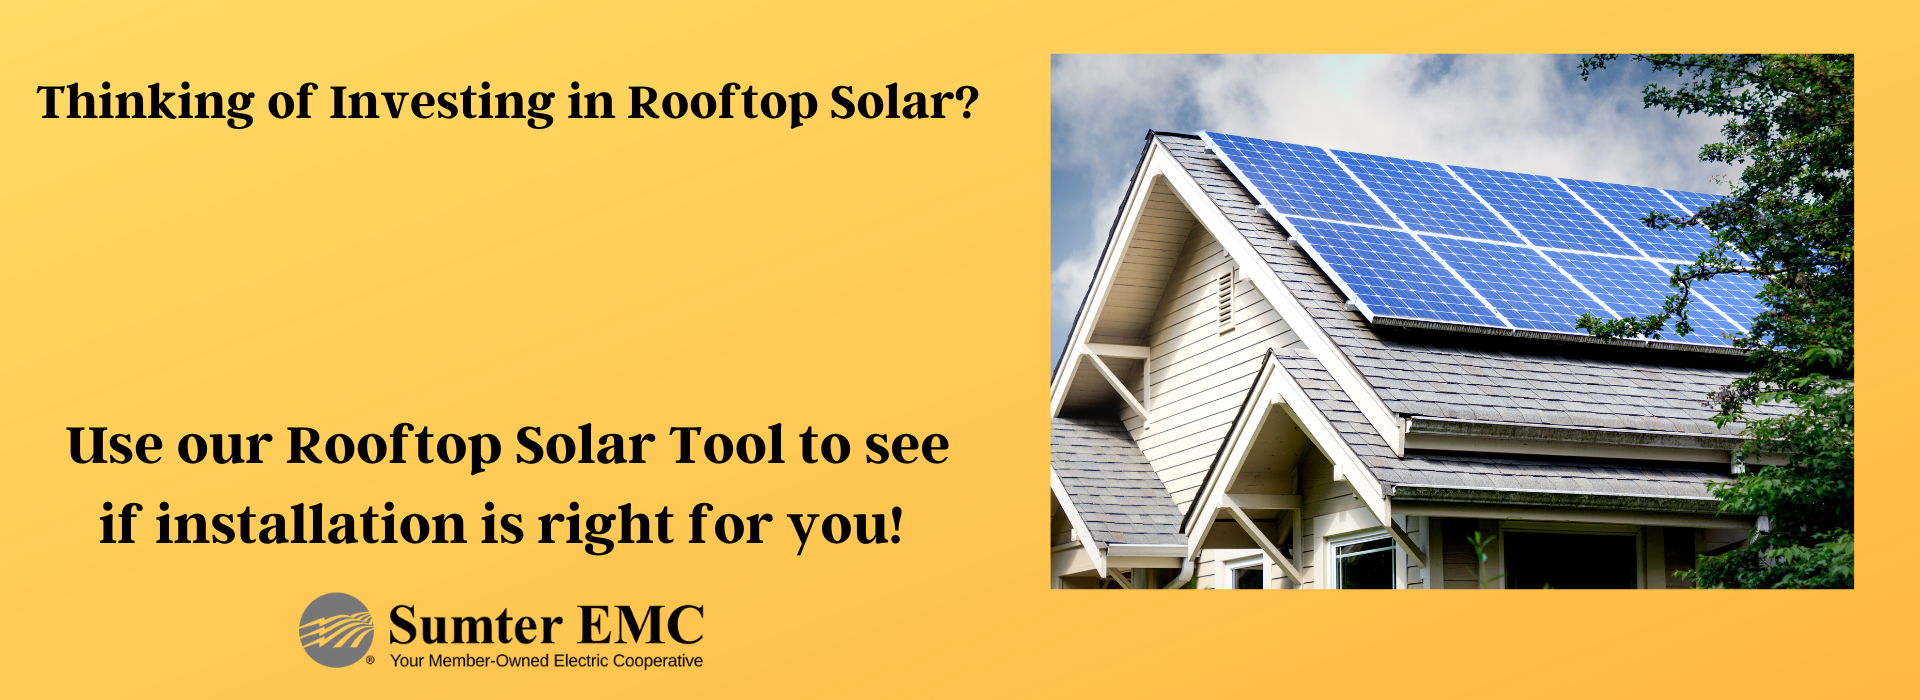 Thinking of Investing in Rooftop Solar?